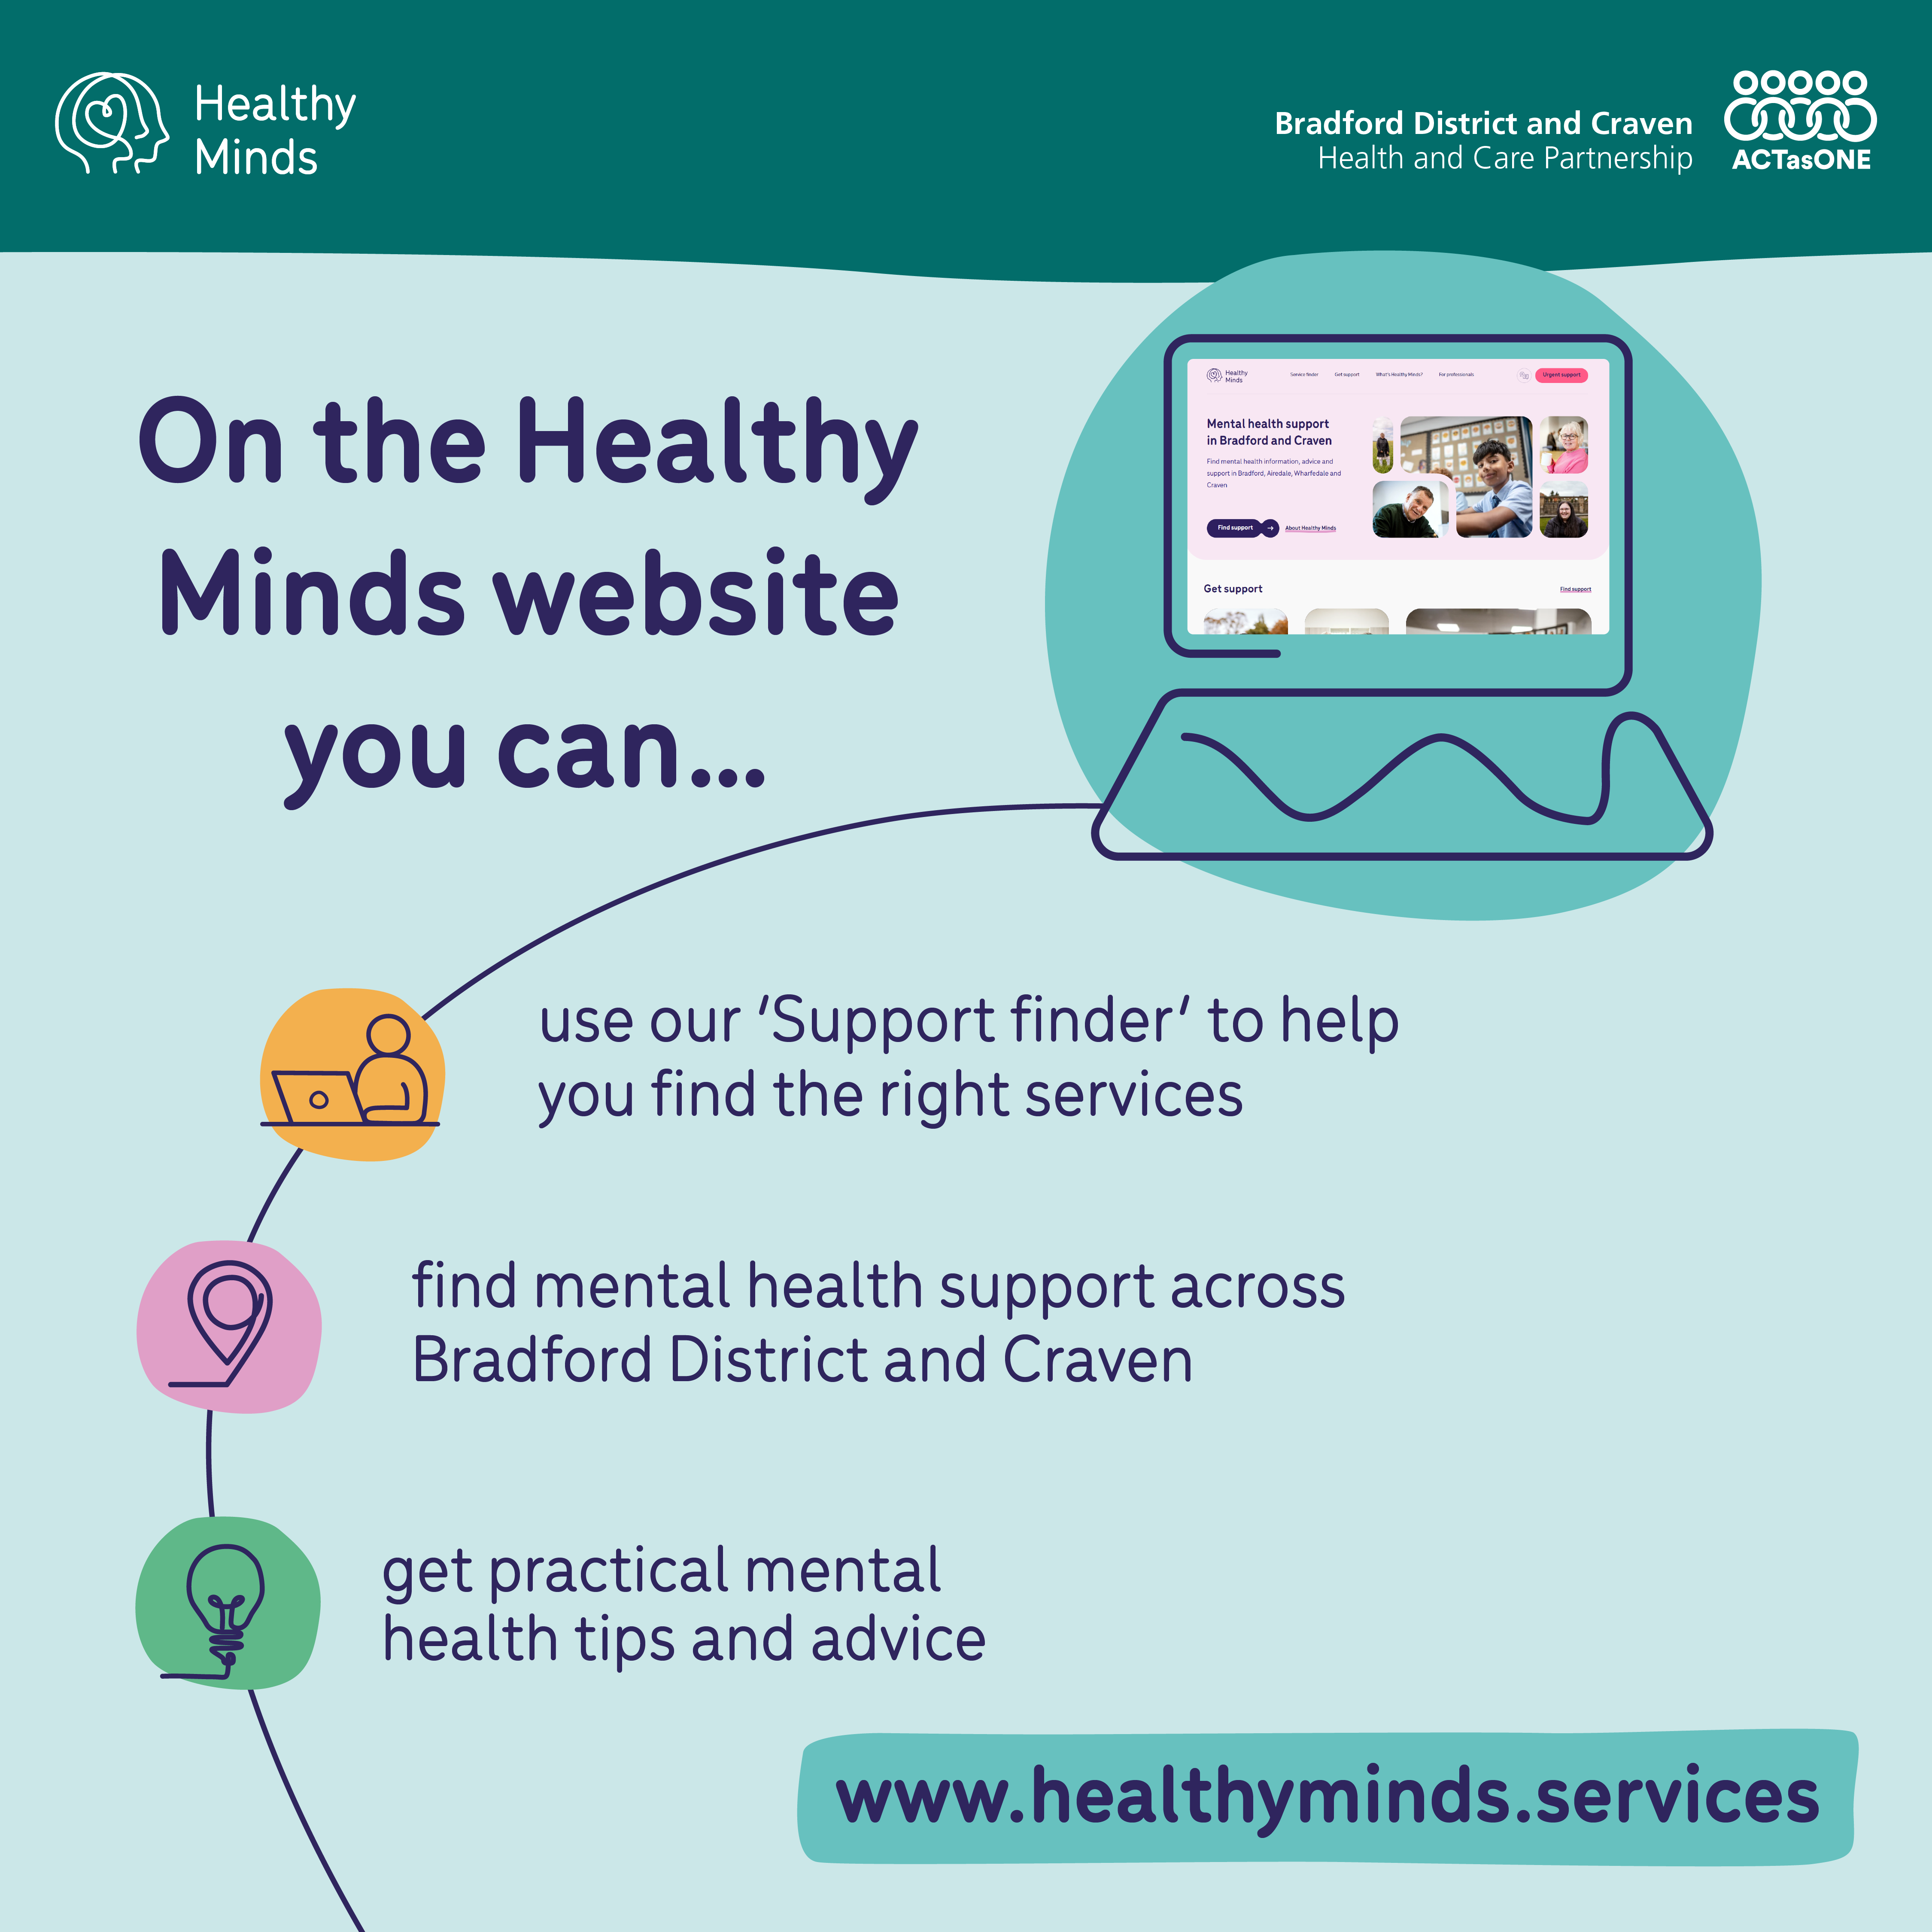 The Healthy Minds website